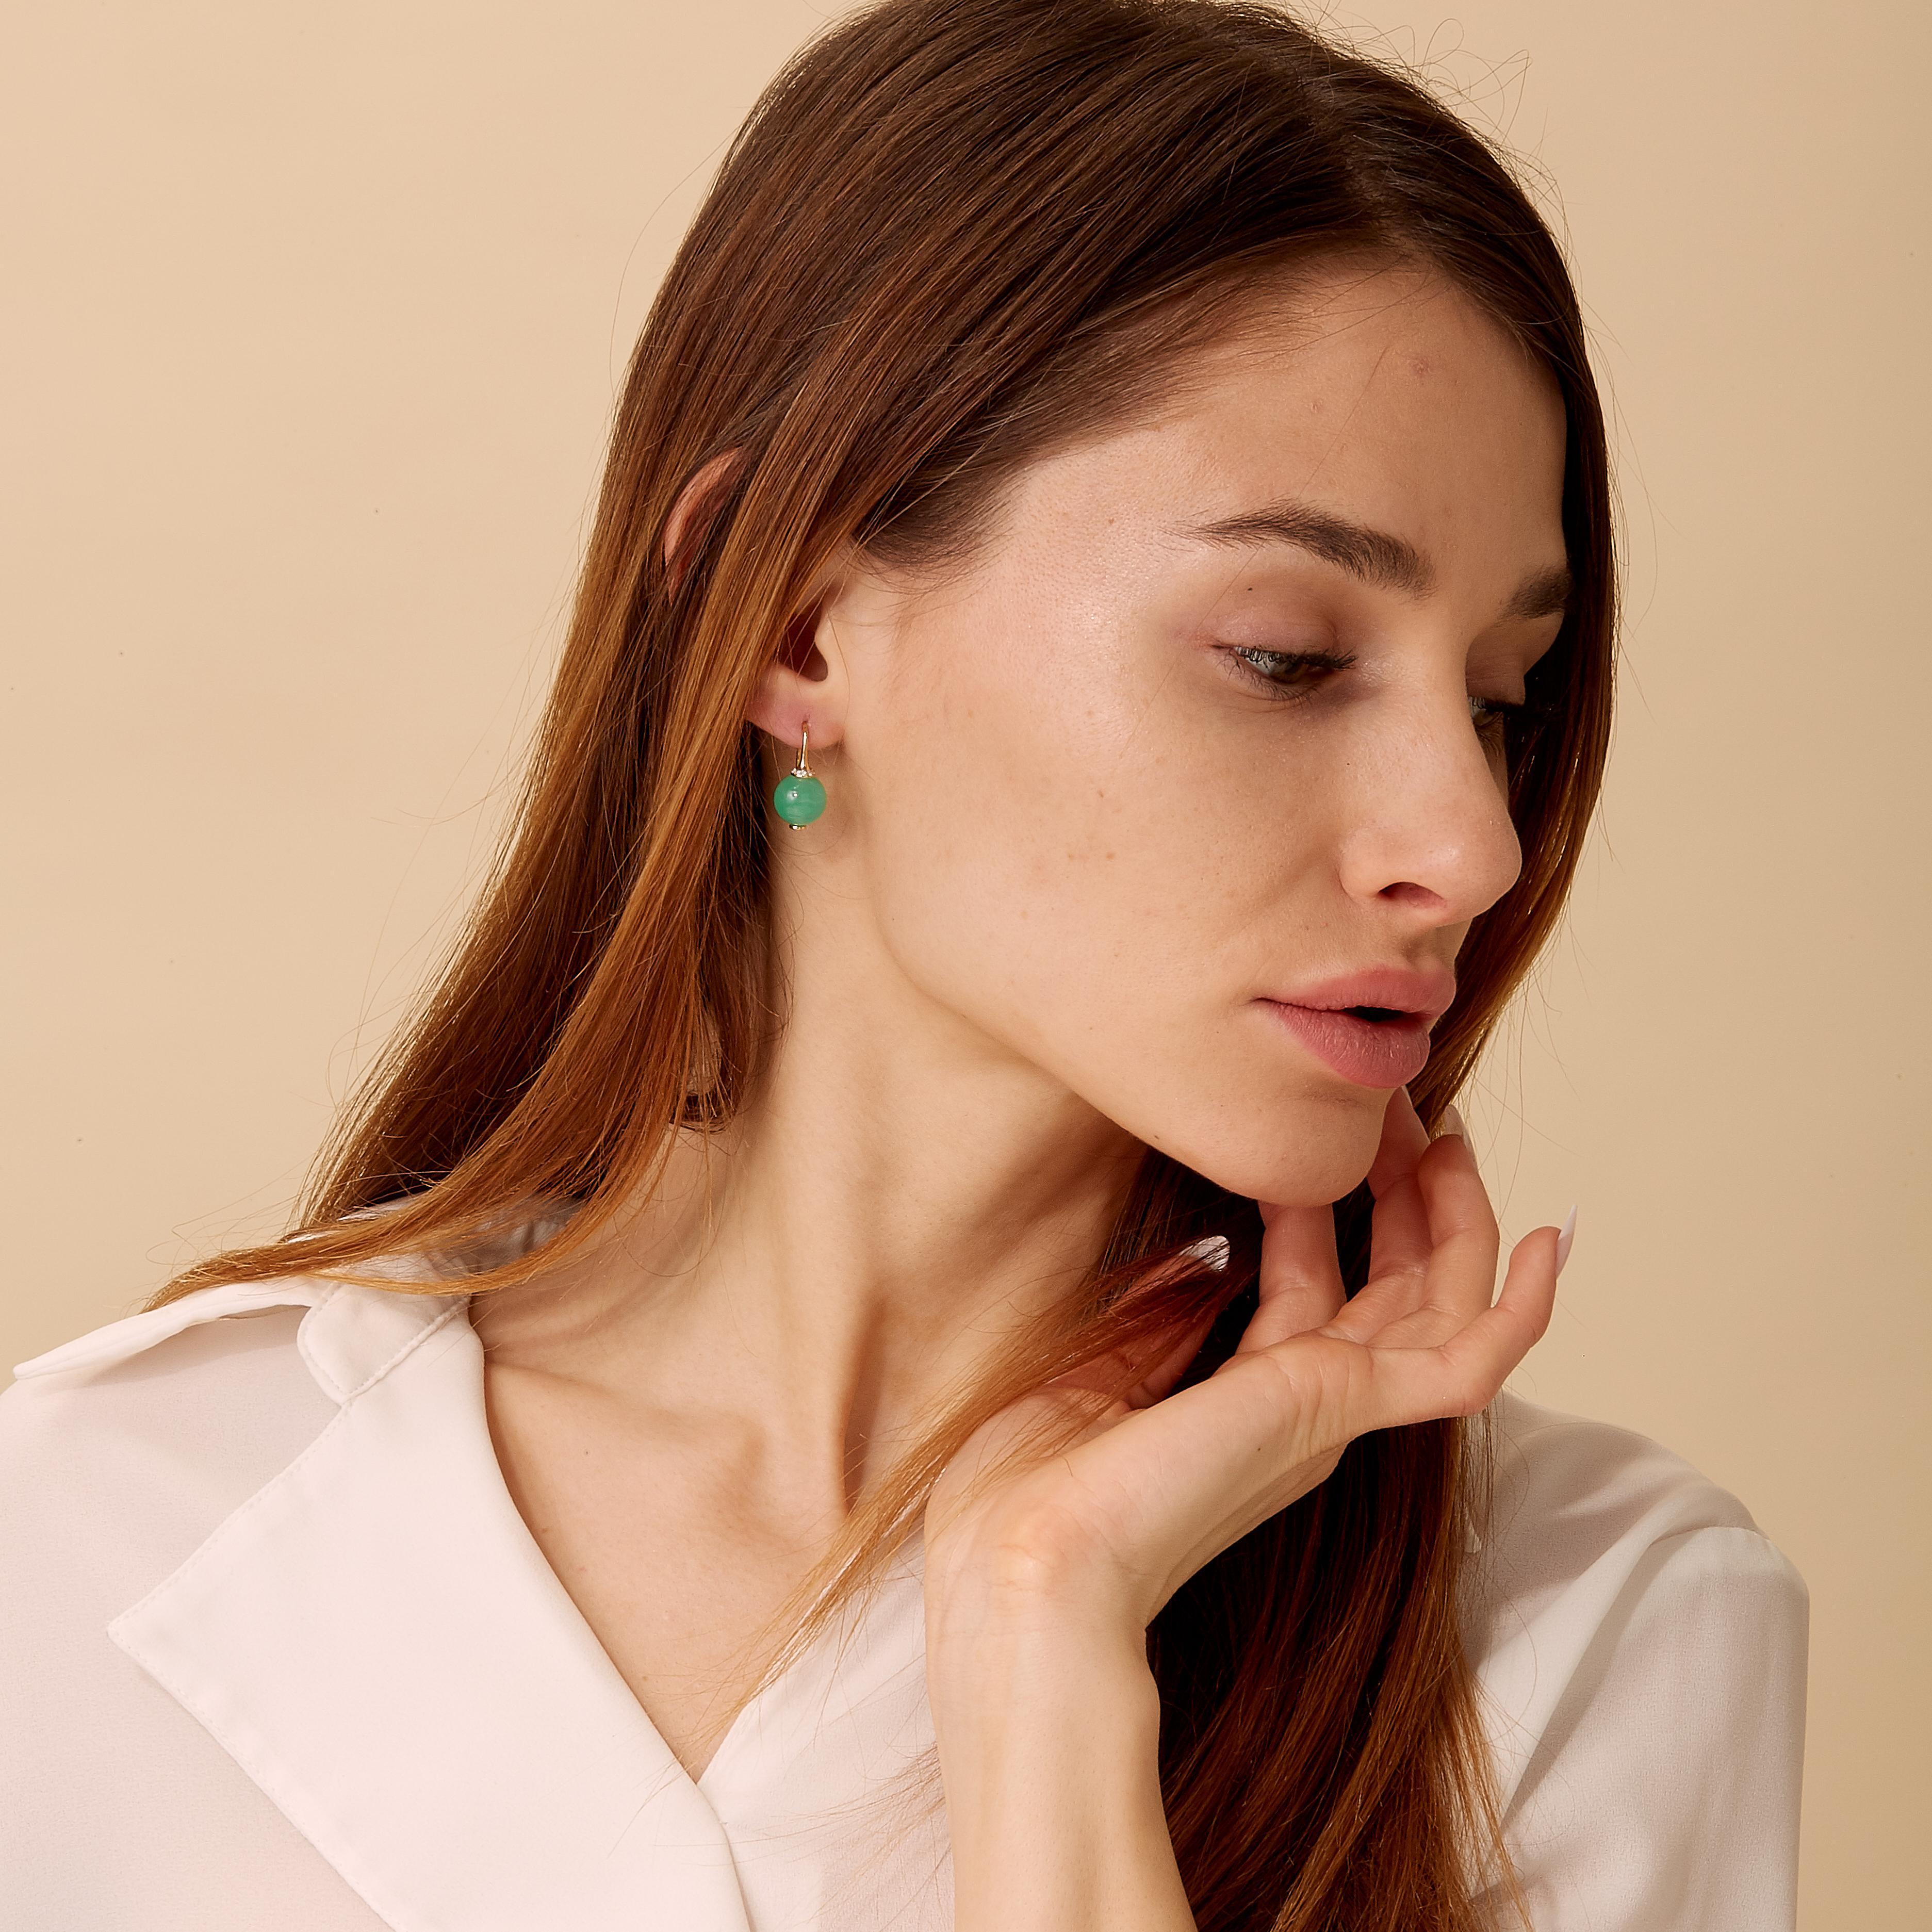 Created in 18 karat yellow gold
Chrysoprase beads 13.50 carats approx.
Diamonds 0.10 carat approx.
Limited edition

Crafted from 18 karat yellow gold, these limited edition earrings feature captivating chrysoprase beads and a sprinkling of